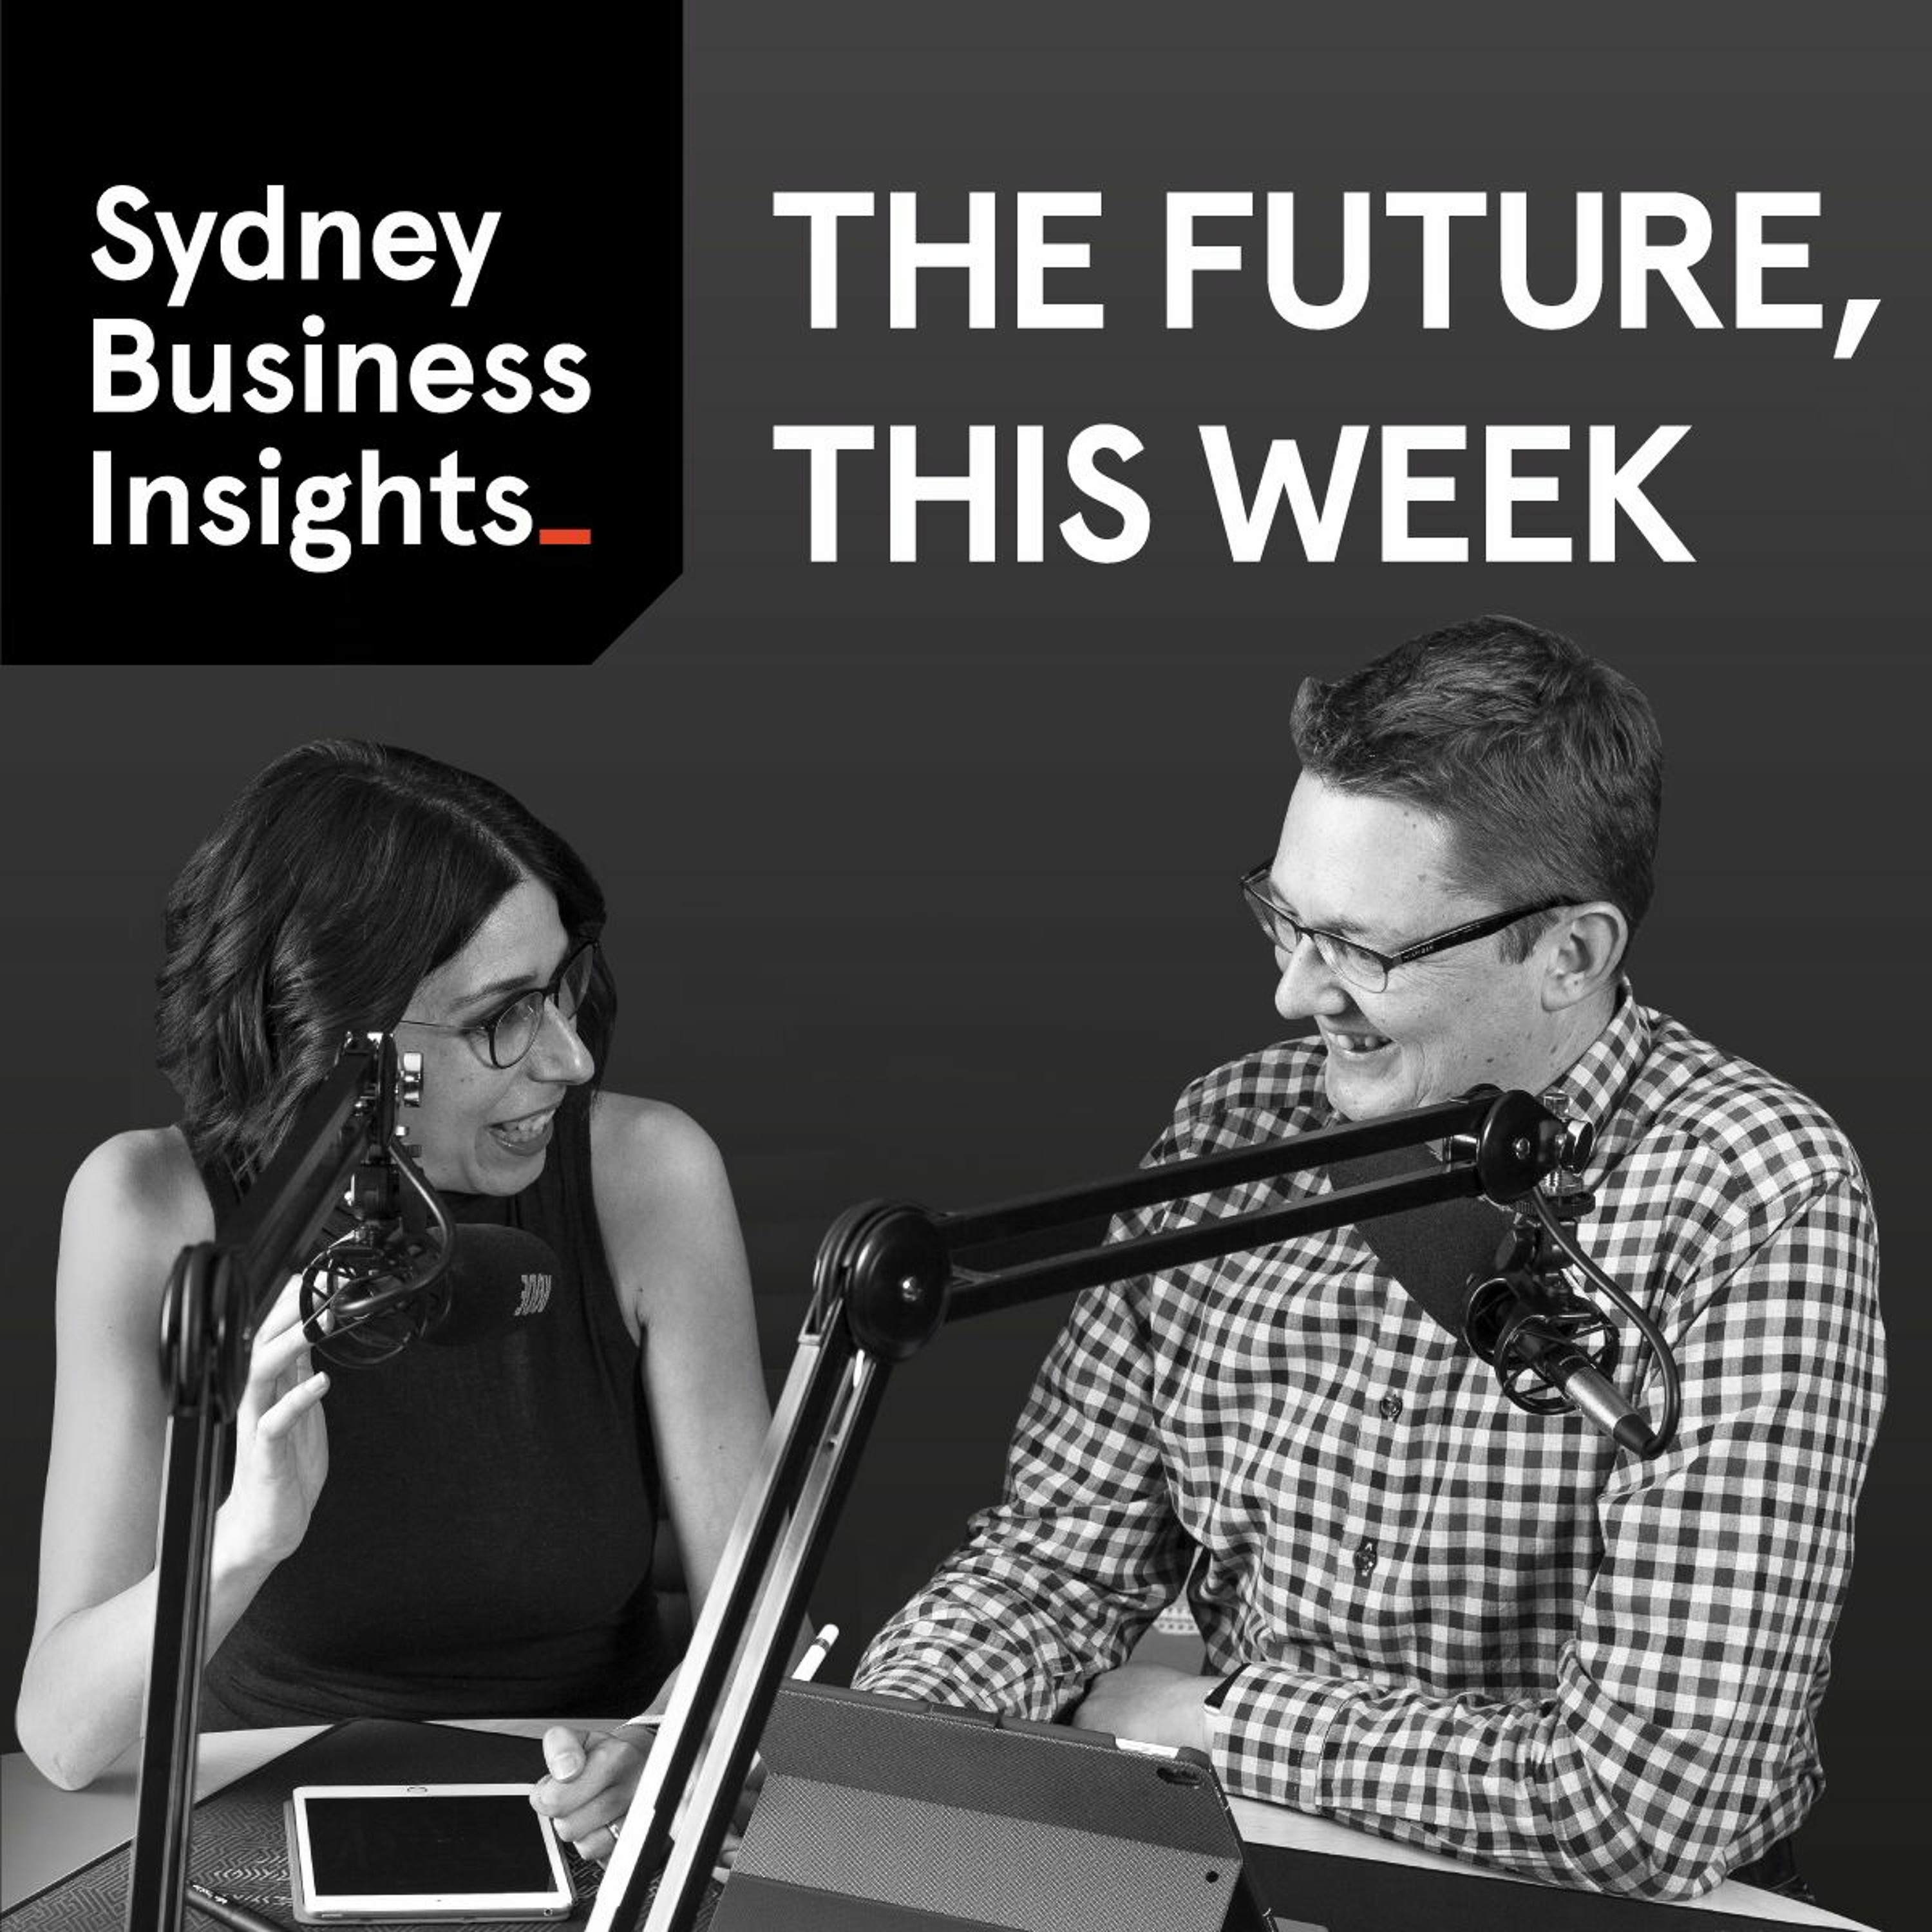 The Future, This Week 13 Oct 2017